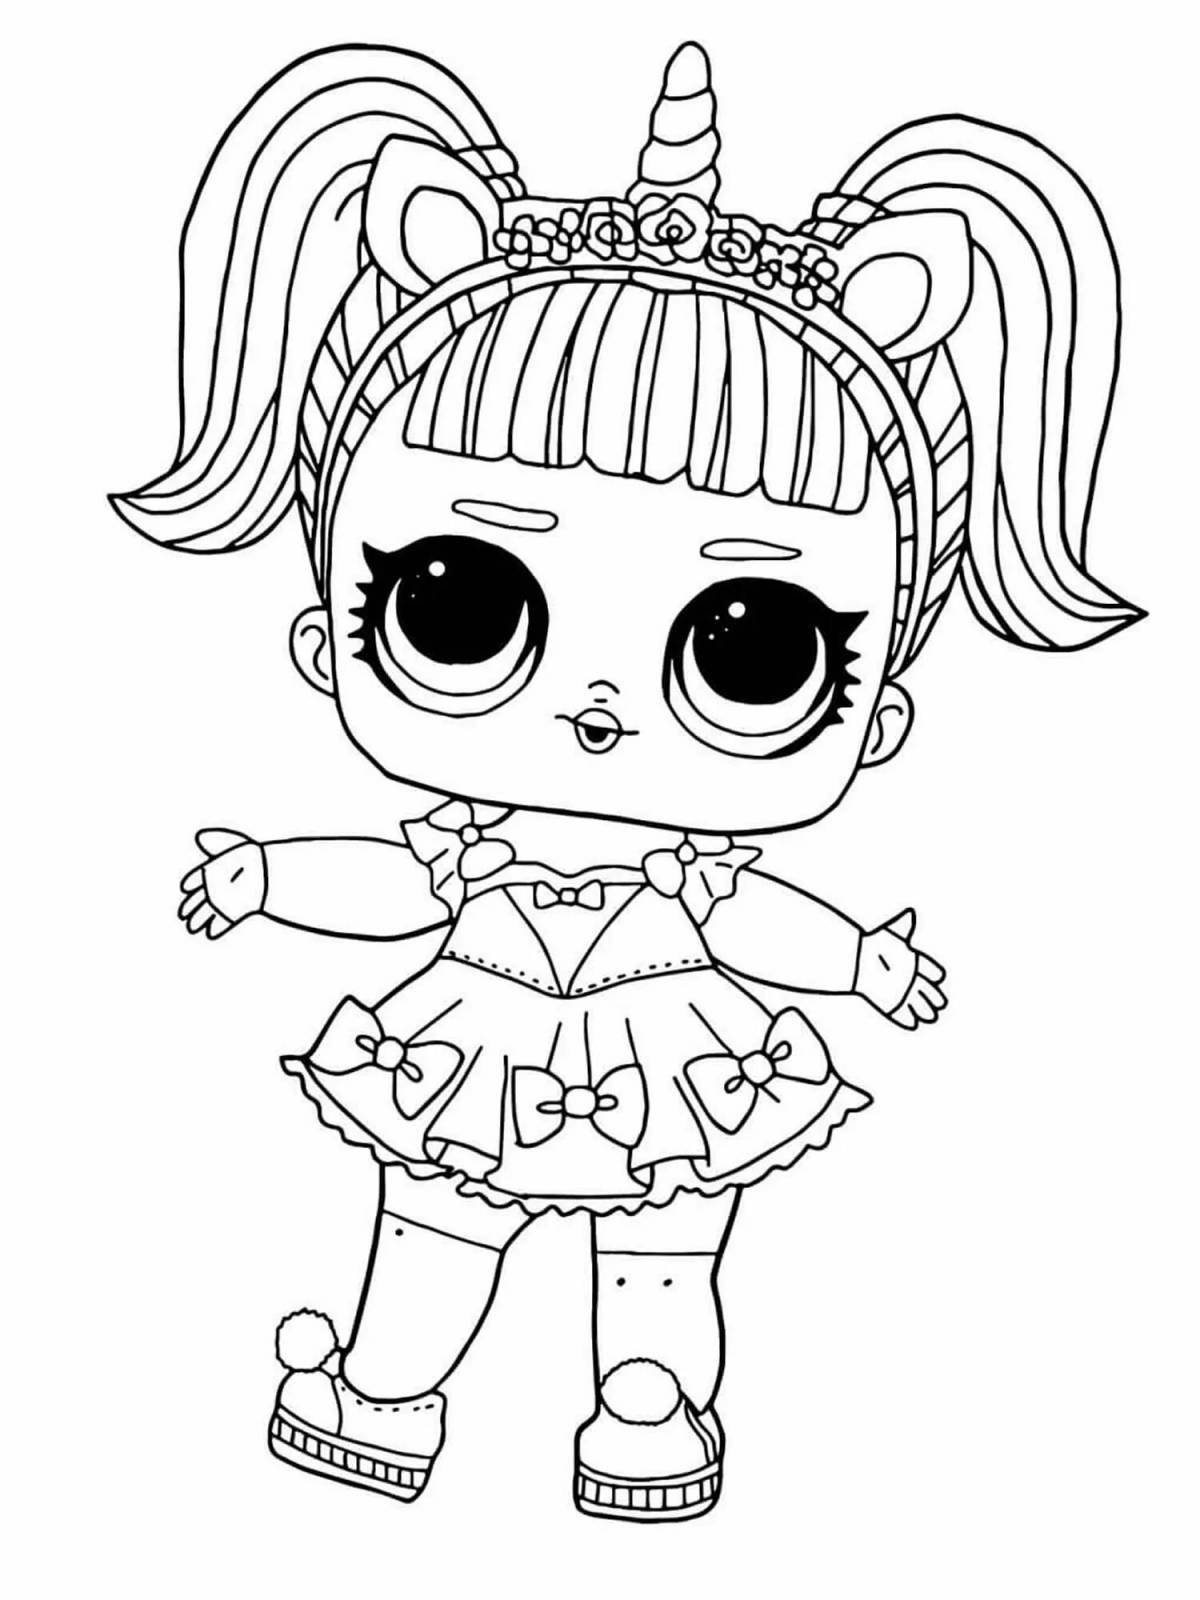 Dazzling lol doll coloring book for kids